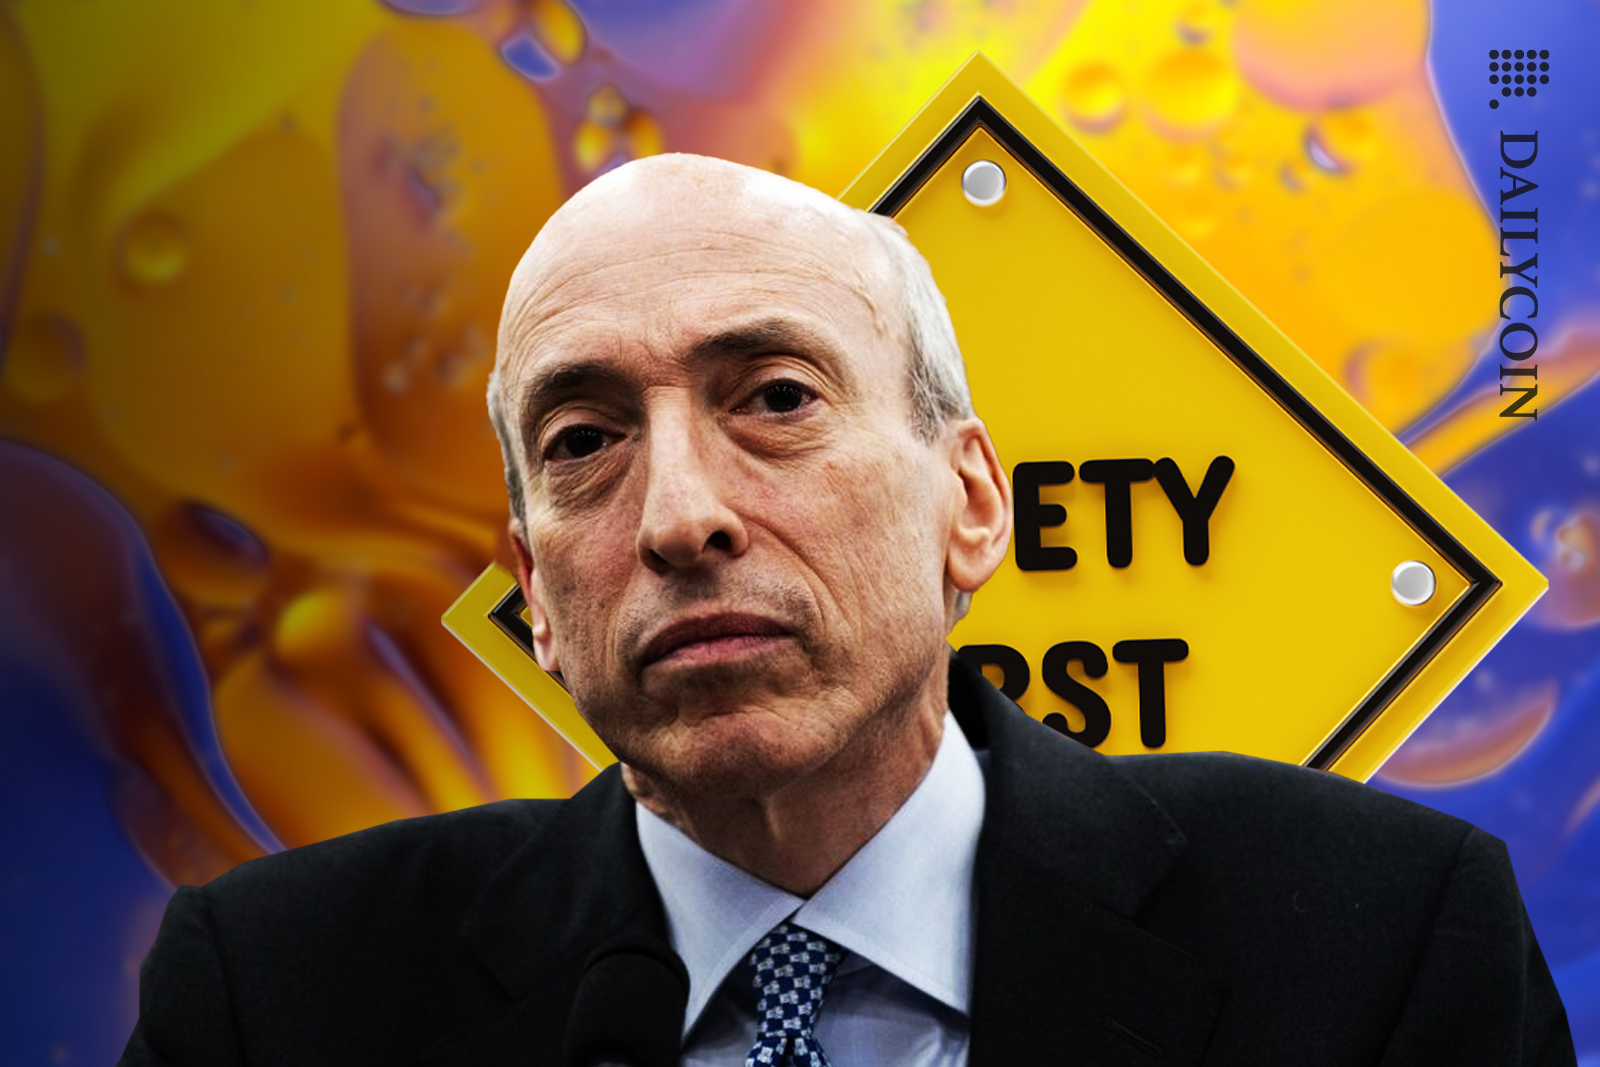 Gary Gensler showing no emotions, ''safety first'' sign behind him.